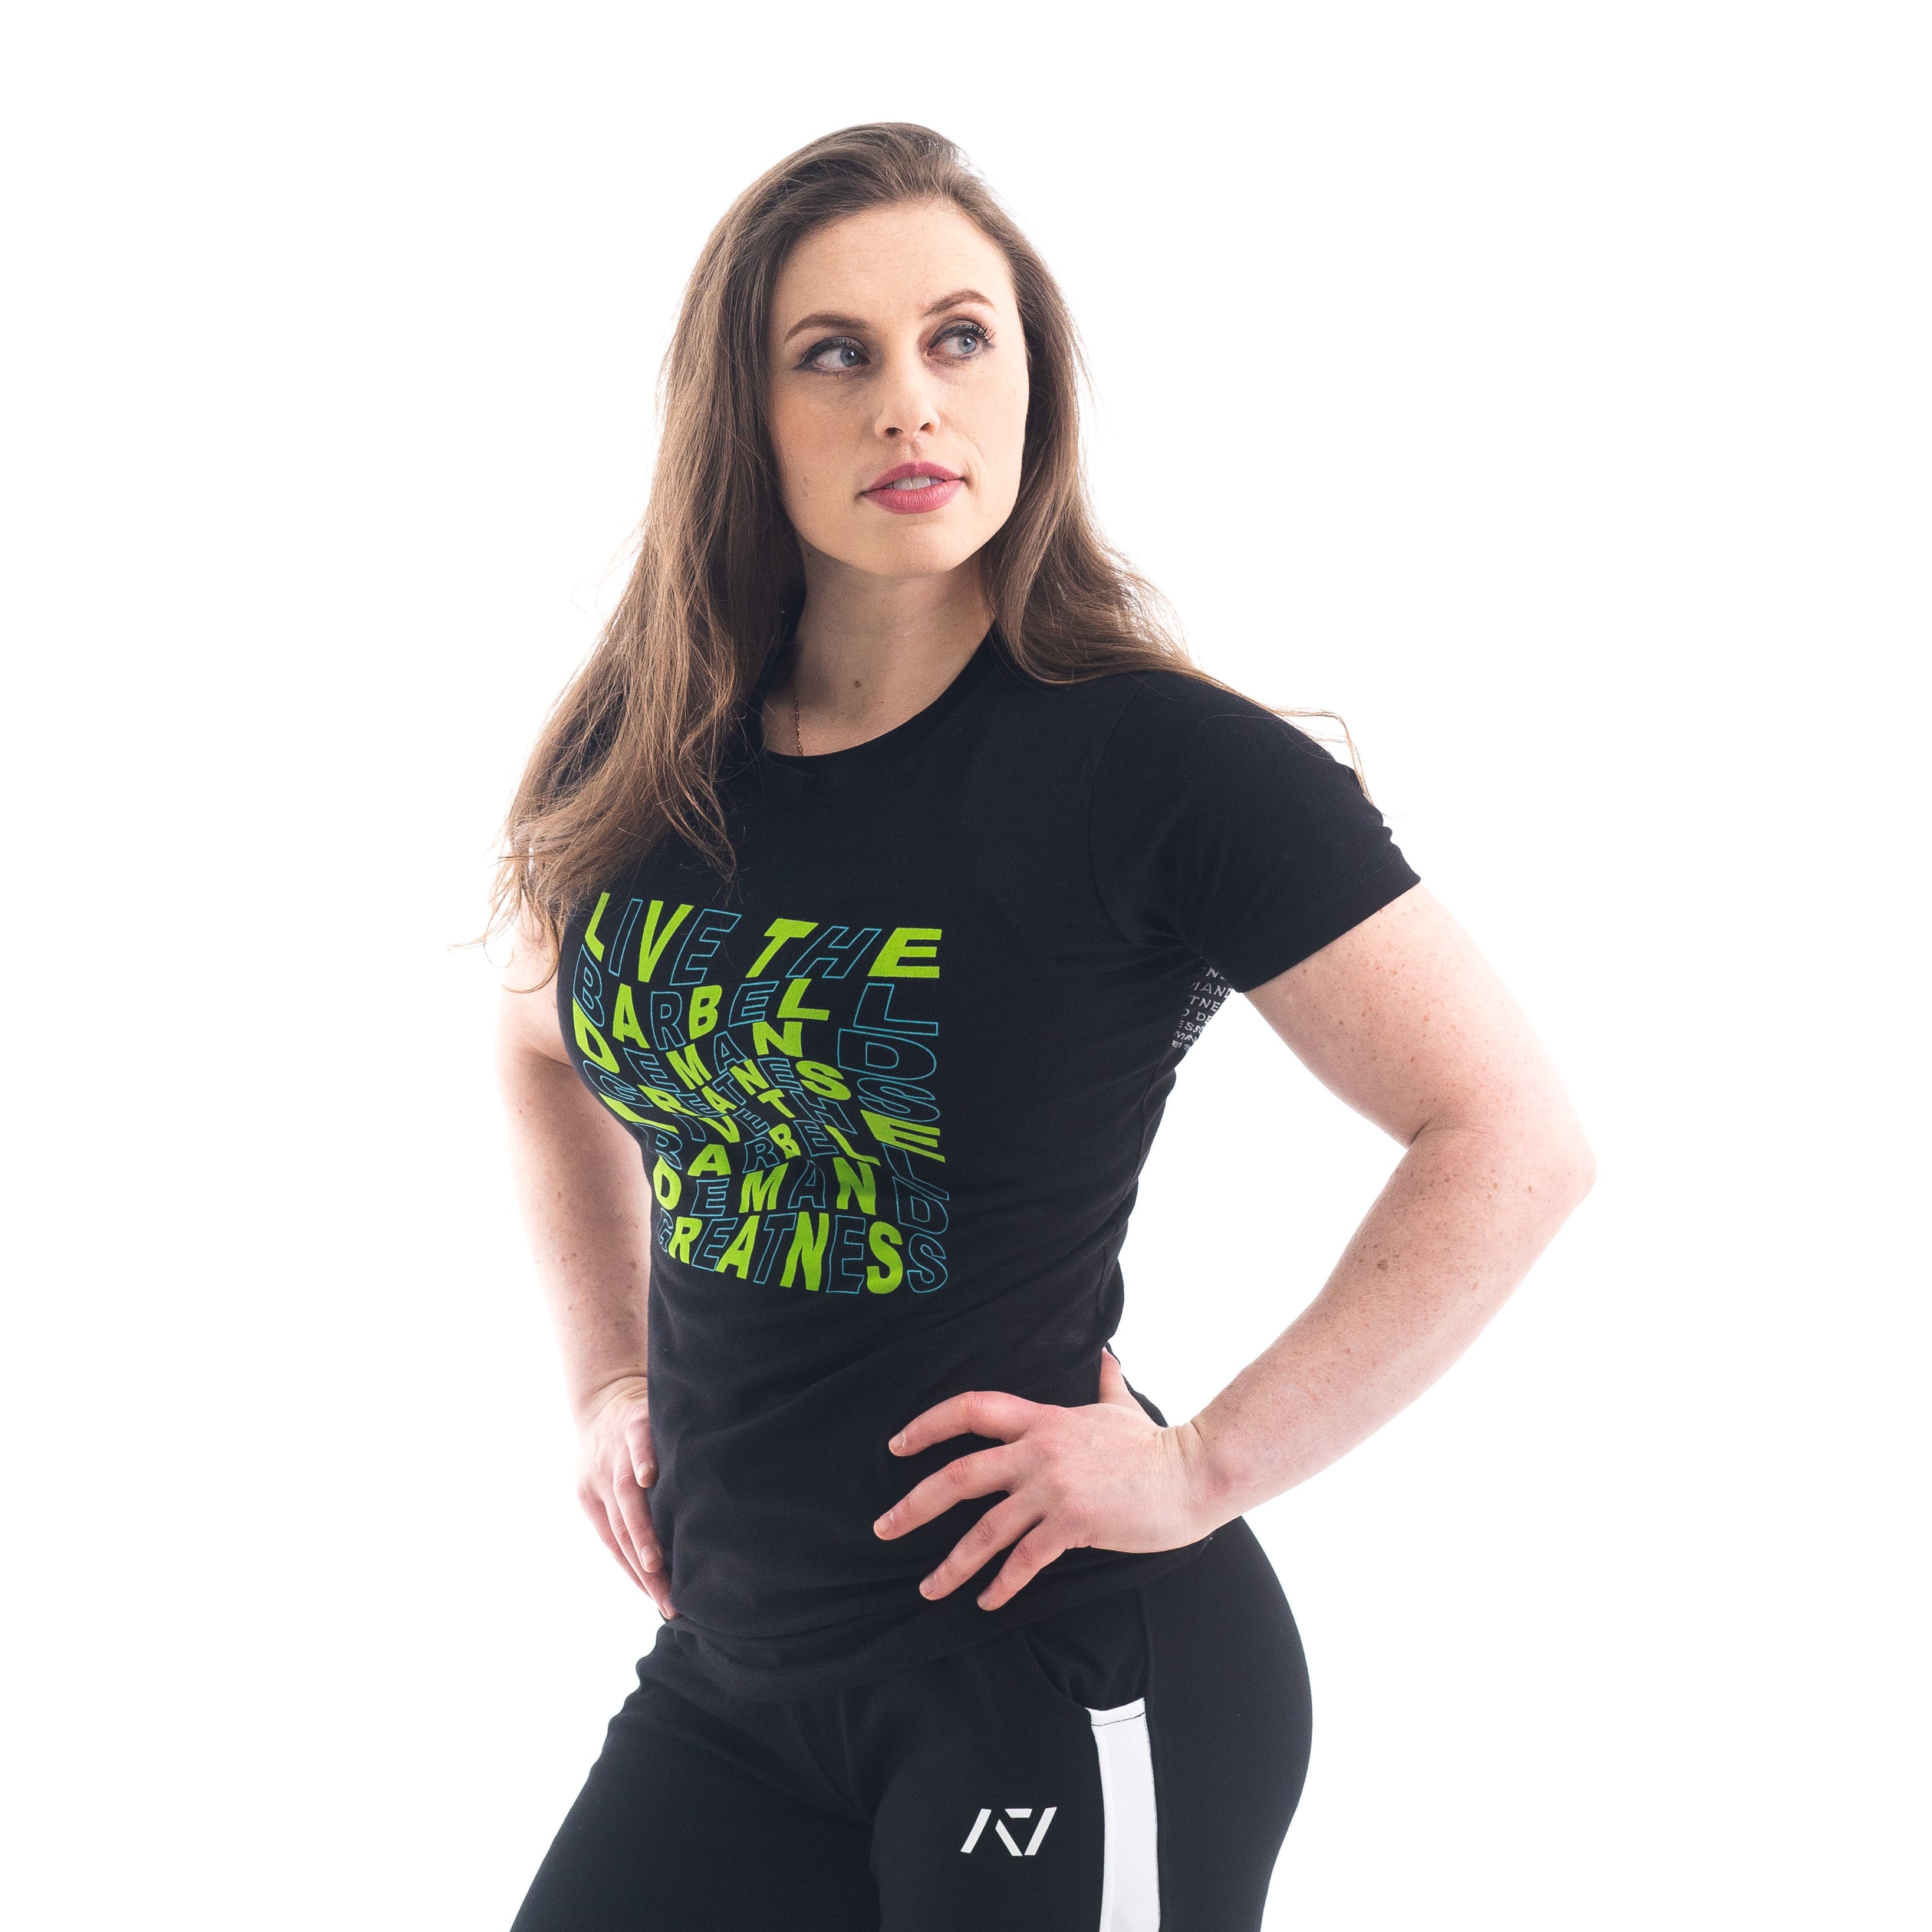 VorText Alien Women's Bar Grip Shirt. Make a stand on the platform as you continue to approach perfection to prove you are not of this world. Whether pressing, pulling, squatting or any other variational movement the knurling is always there. The silicone bar grip helps with slippery commercial benches and bars and anchors the barbell to your back. All A7 Powerlifting Equipment shipping to UK, Norway, Switzerland and Iceland.